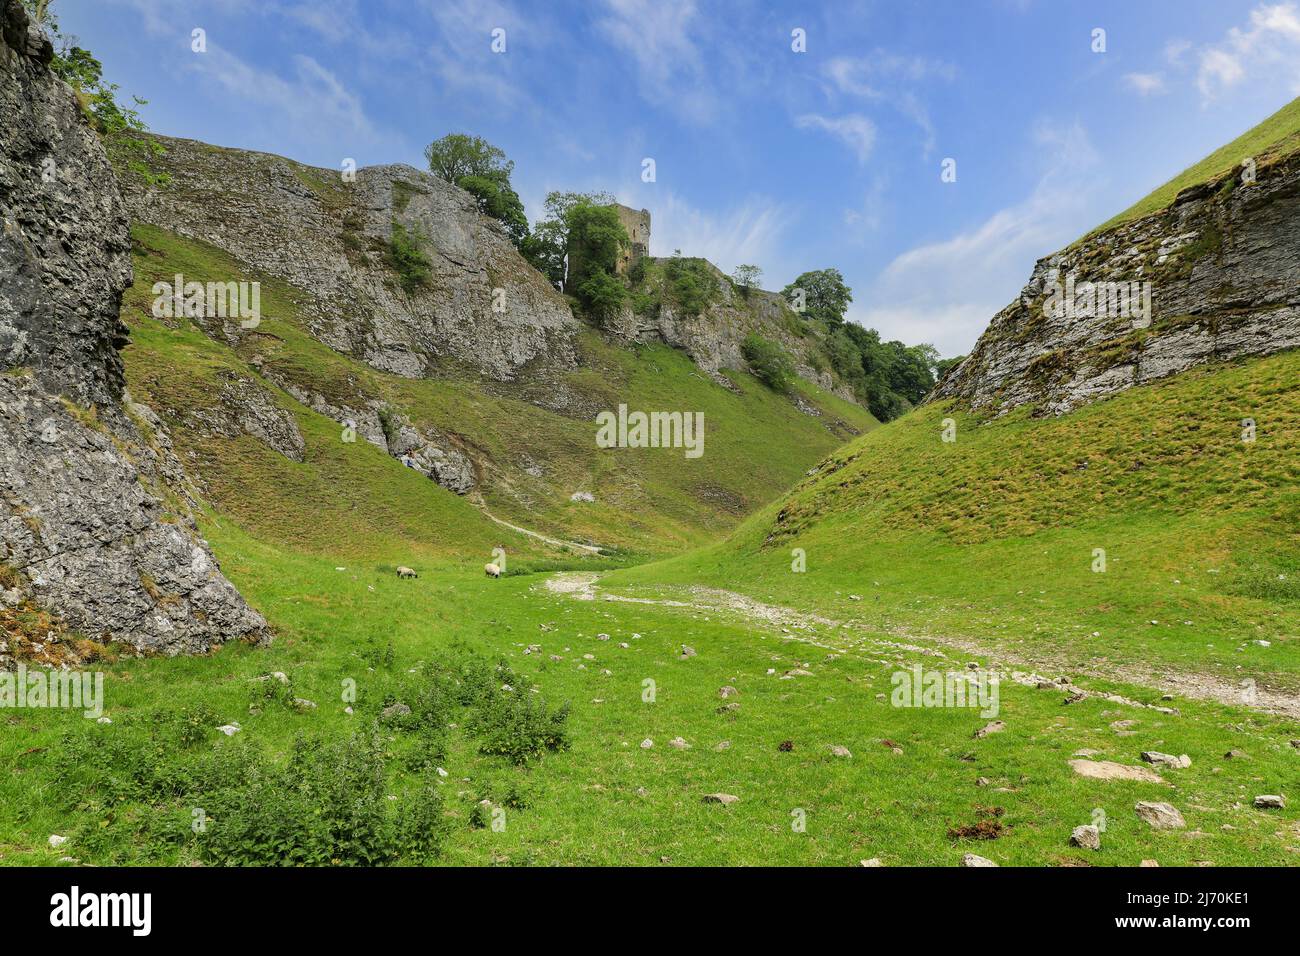 Cave Dale (or Cavedale), a dry limestone valley in the Derbyshire Peak District, Castleton, Derbyshire, England, UK Stock Photo